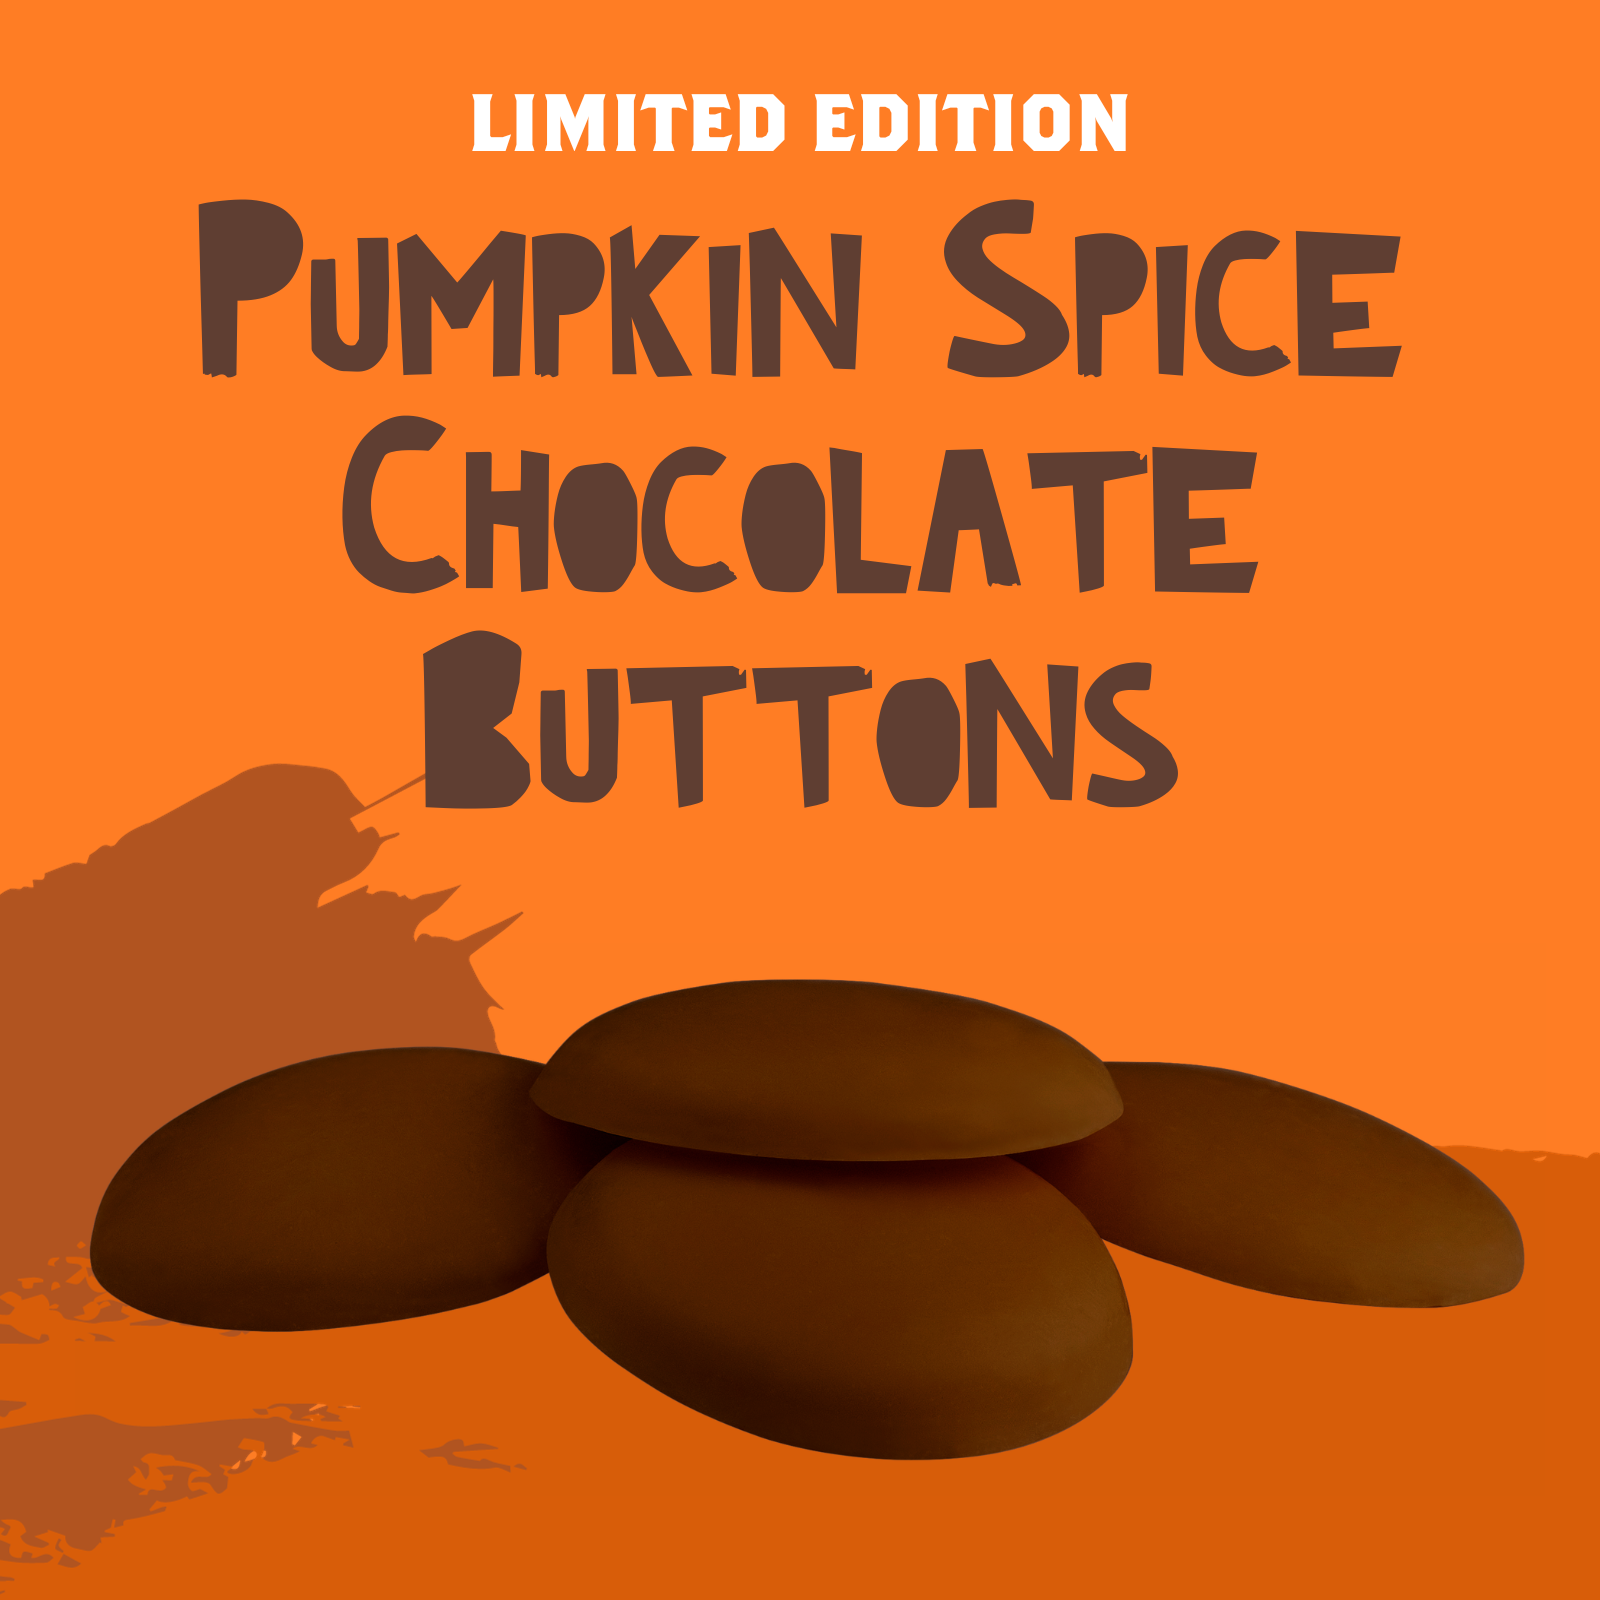 LIMITED EDITION - Pumpkin Spice Chocolate Buttons